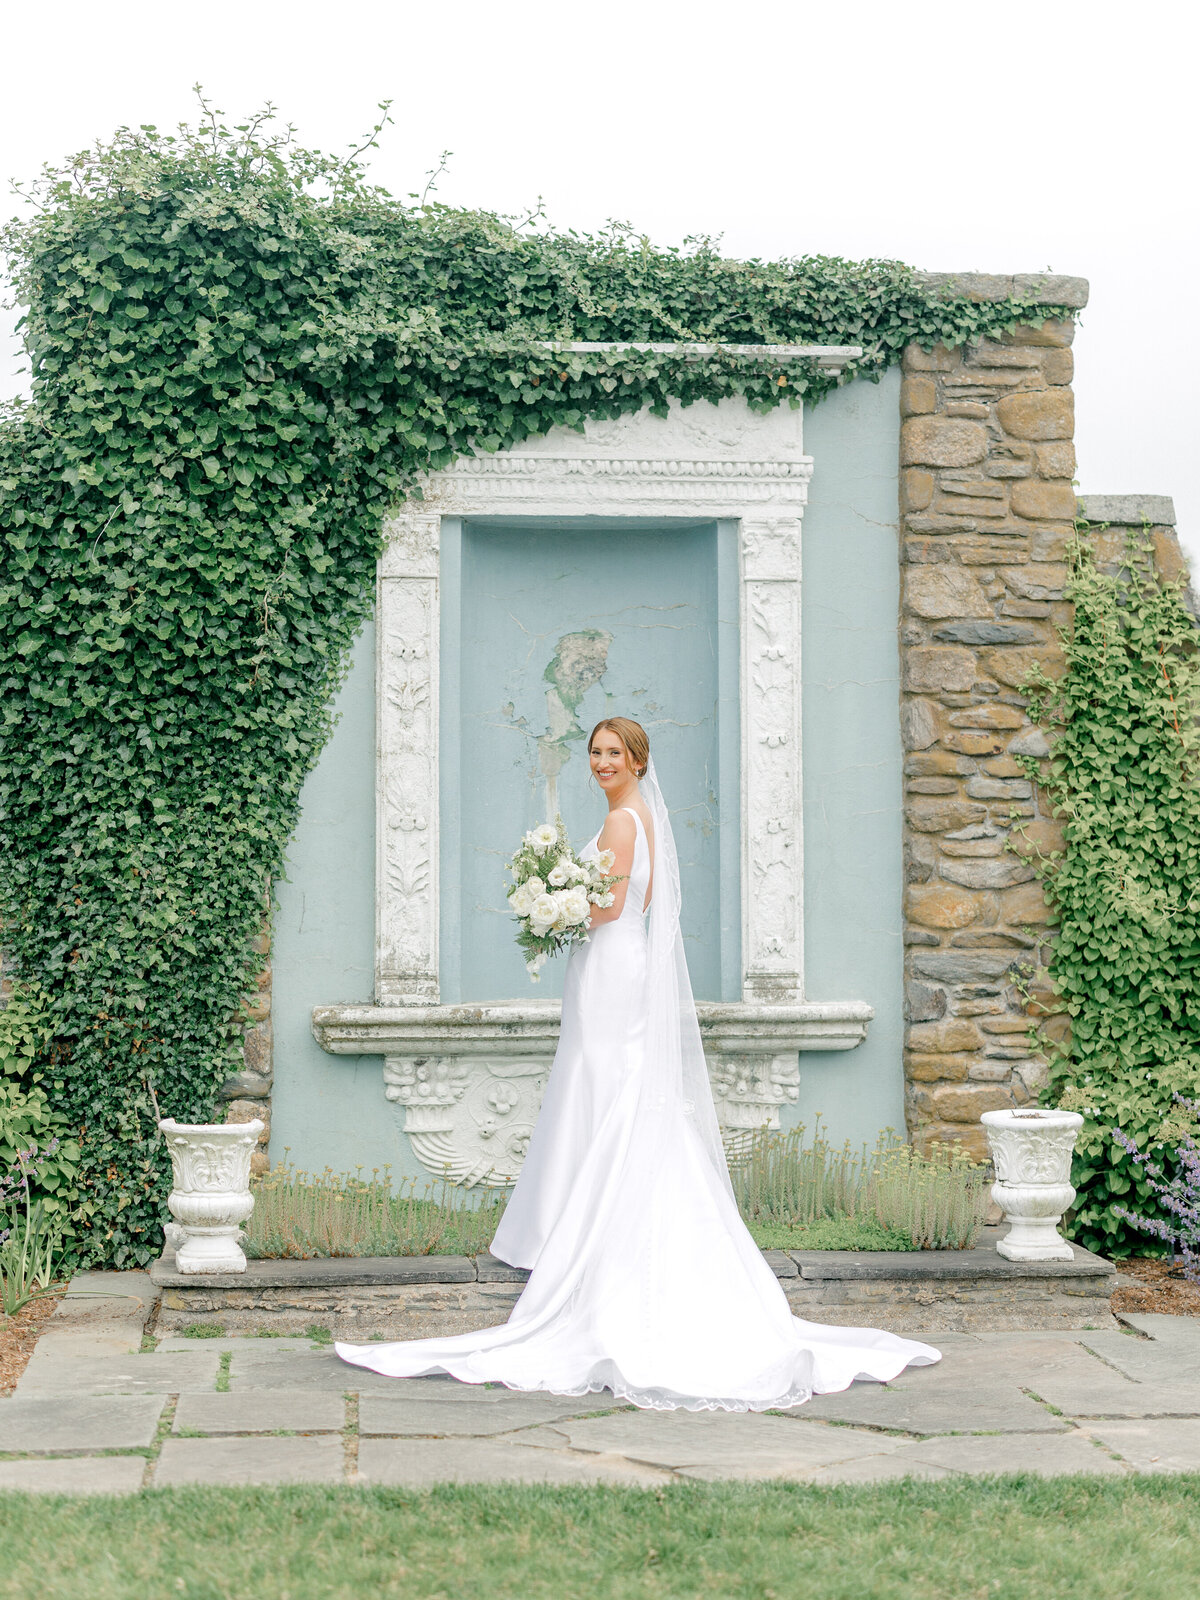 Bride standing with her dress train behind her in front of a blue marble and stone wall covered in ivy